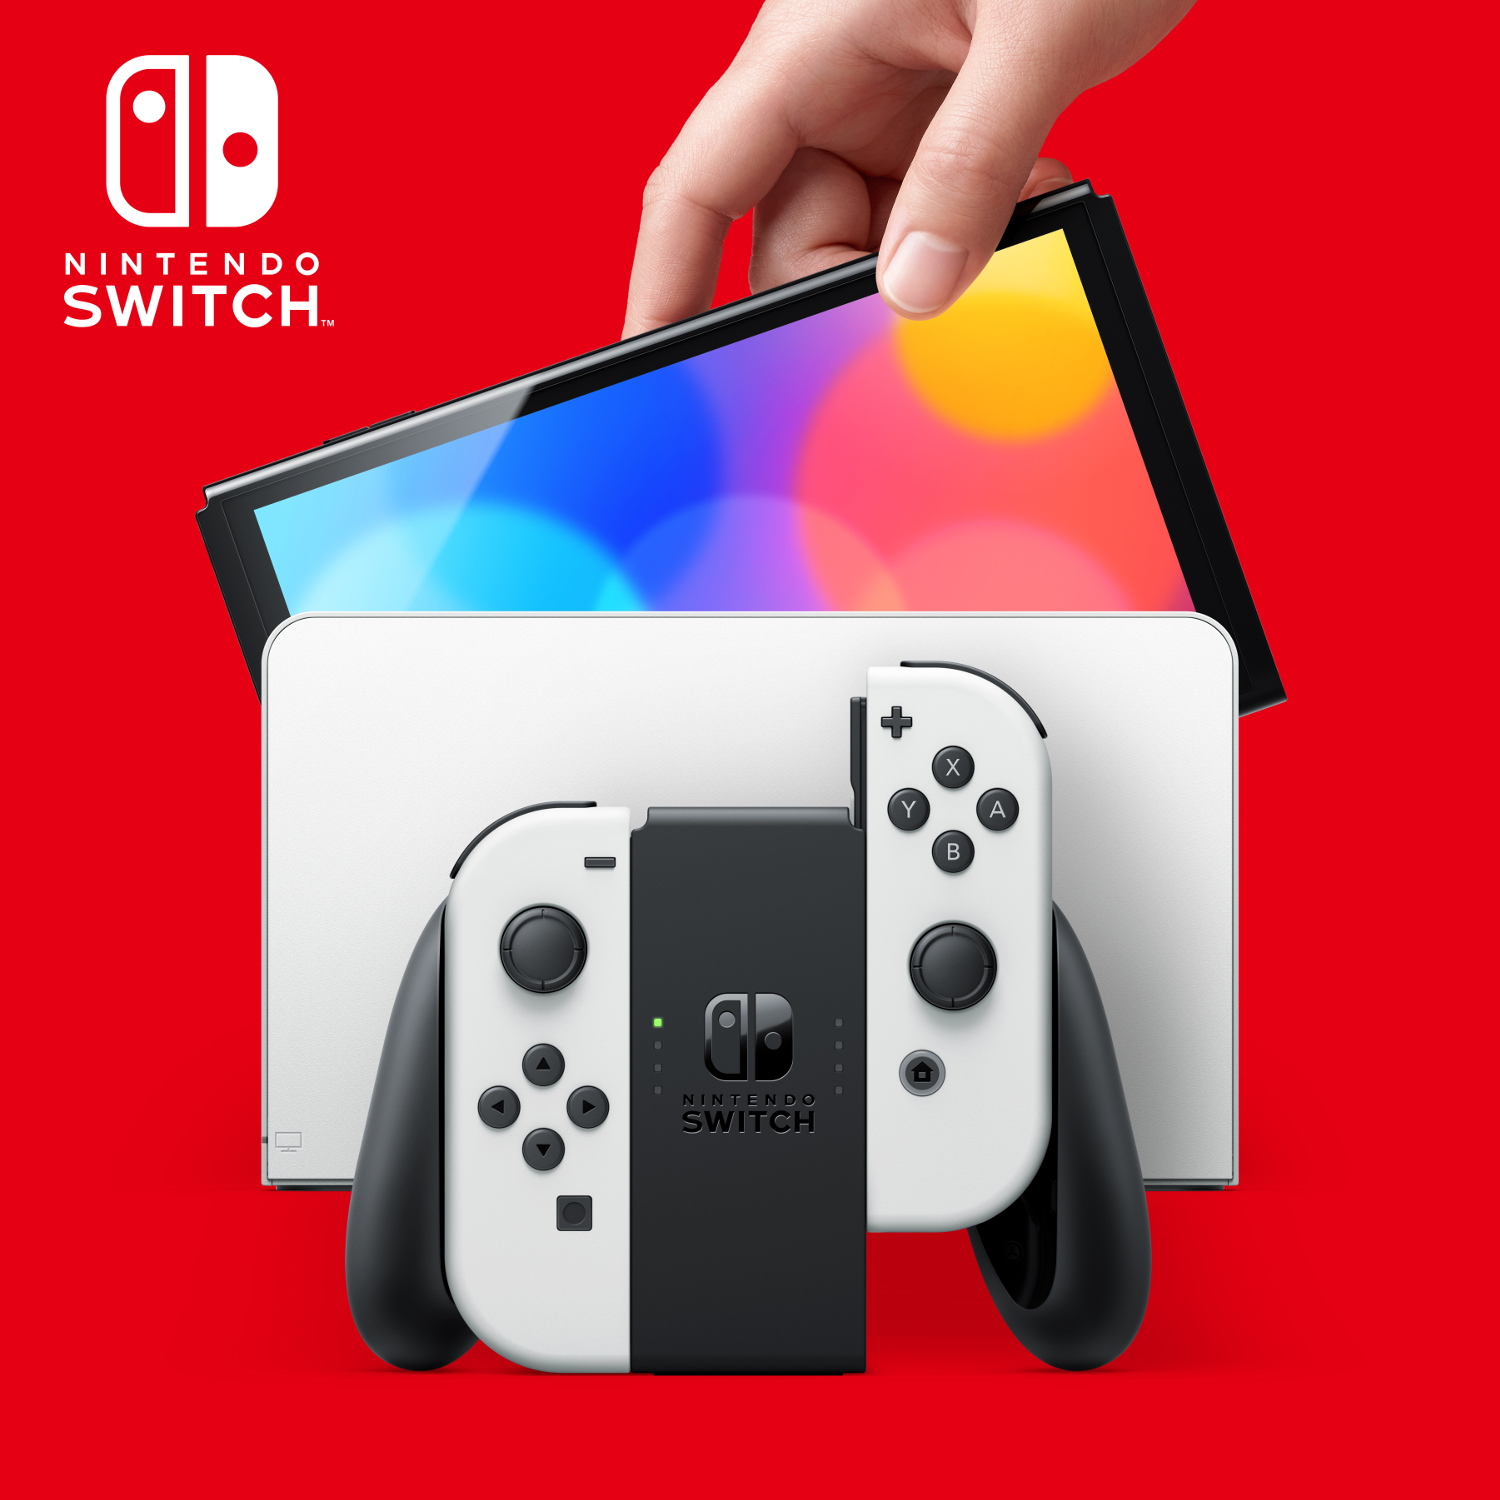 Gallery: Nintendo Switch (OLED Model) Packaging And More Product NintendoSoup